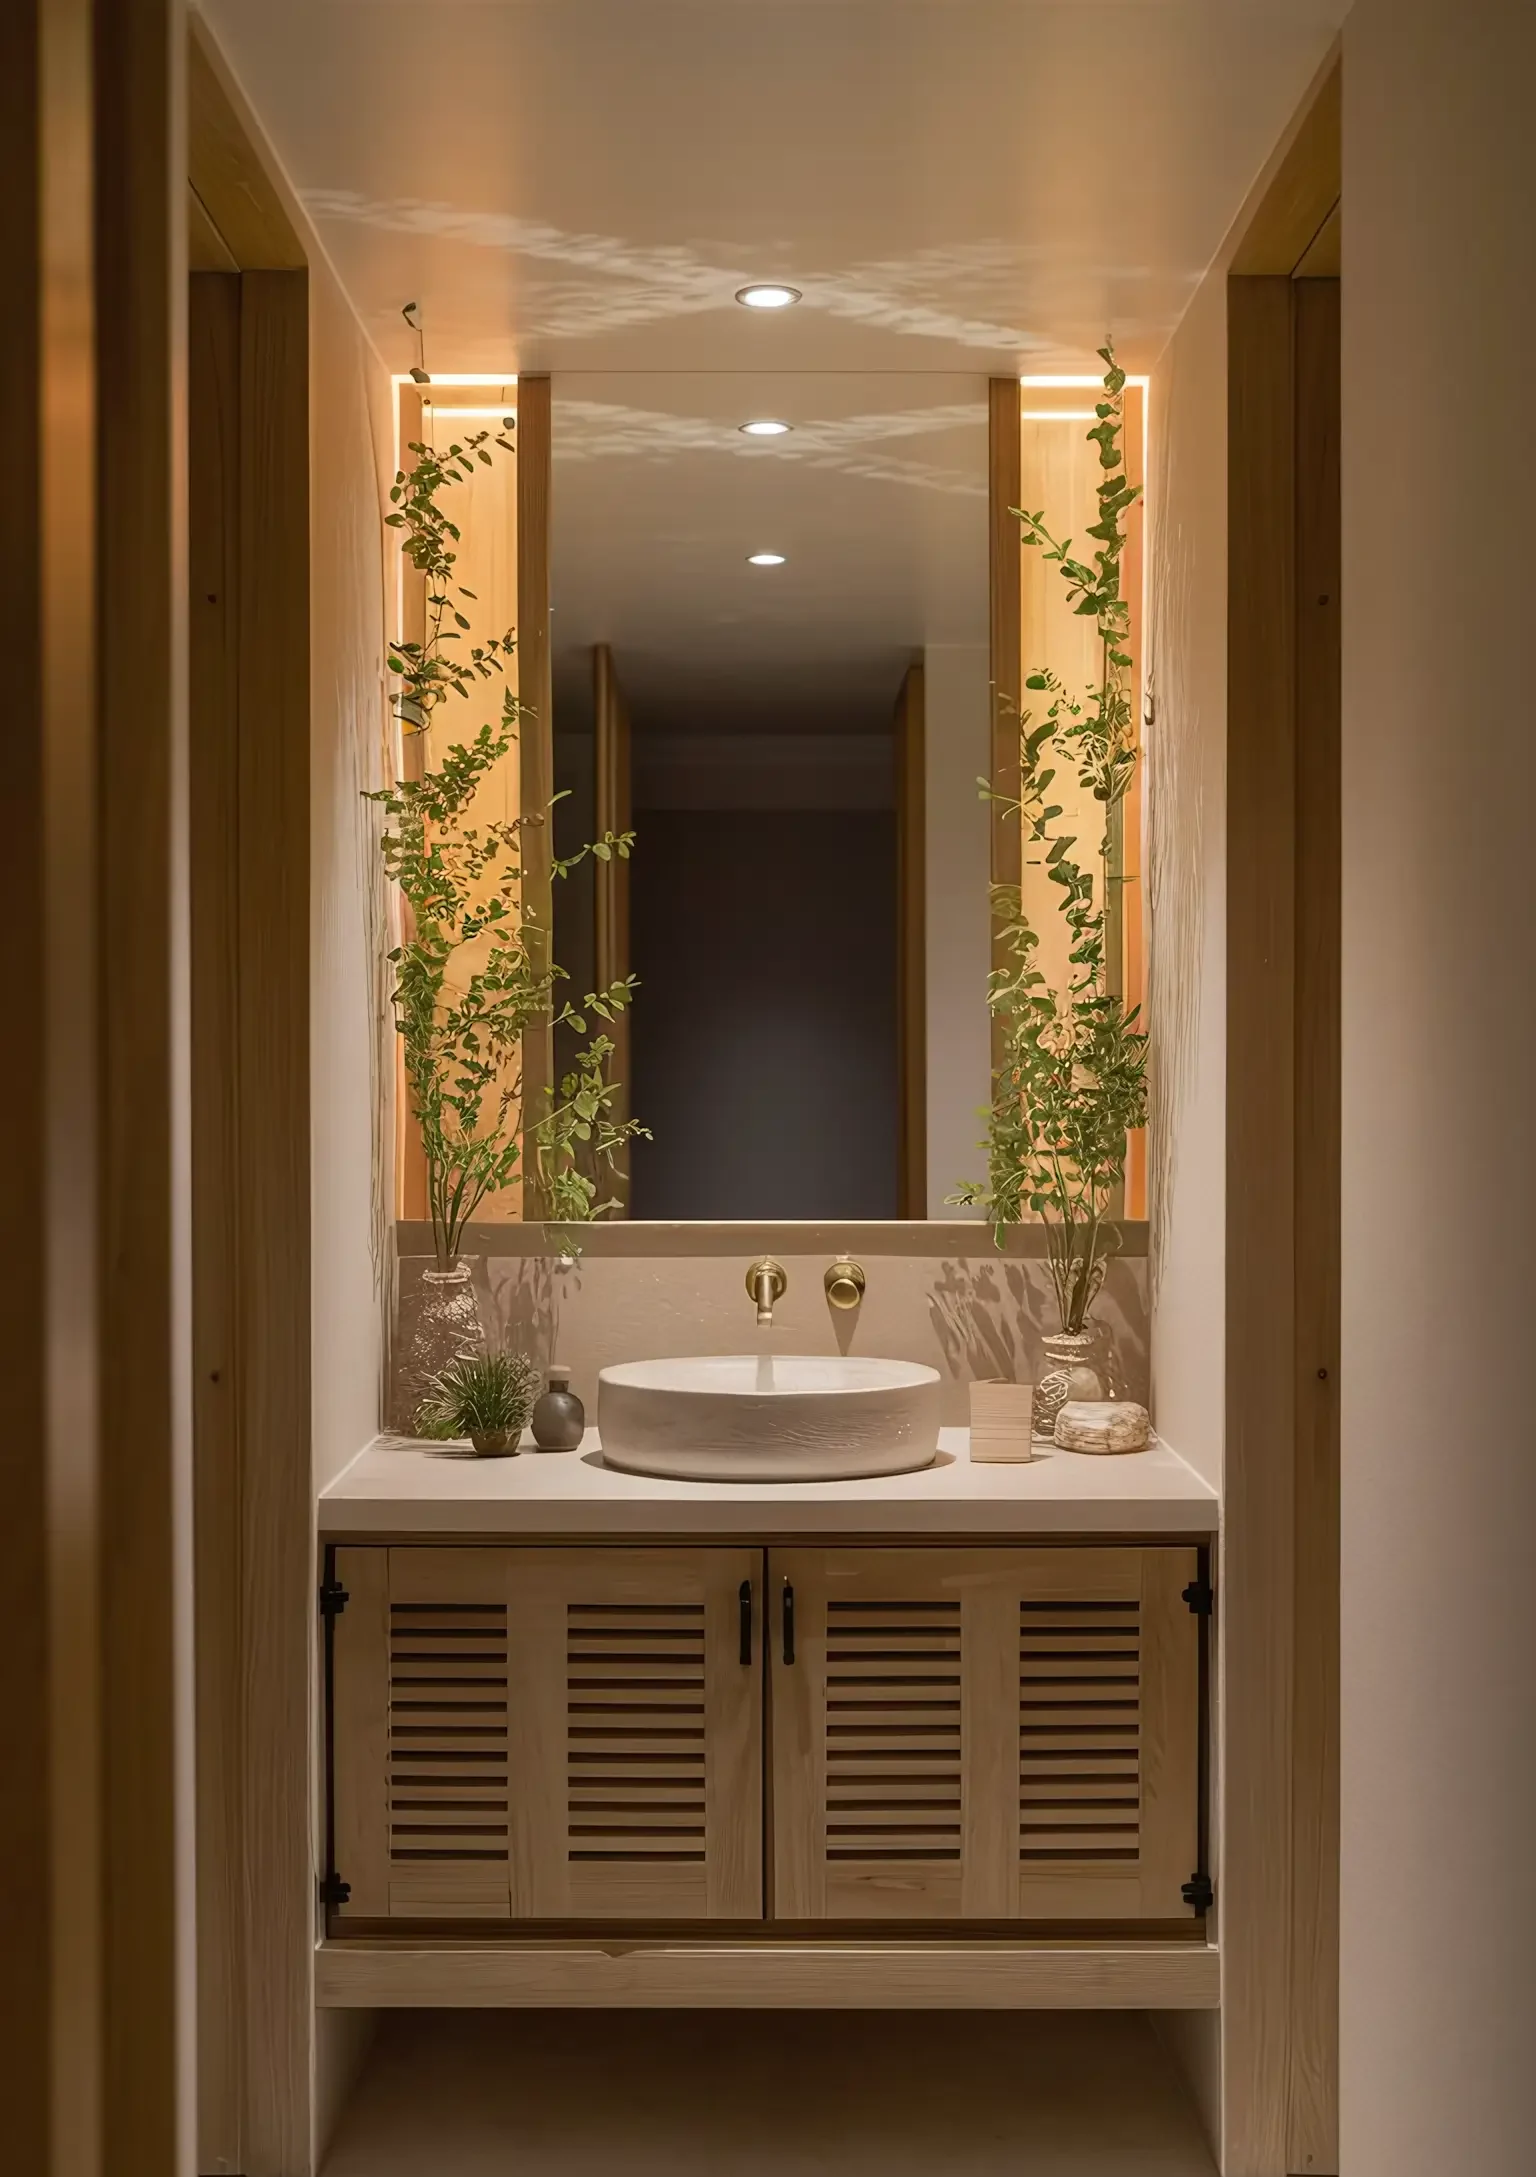 Traditional bathroom vanity with a zen-inspired design, featuring natural materials, simple lines, and greenery.